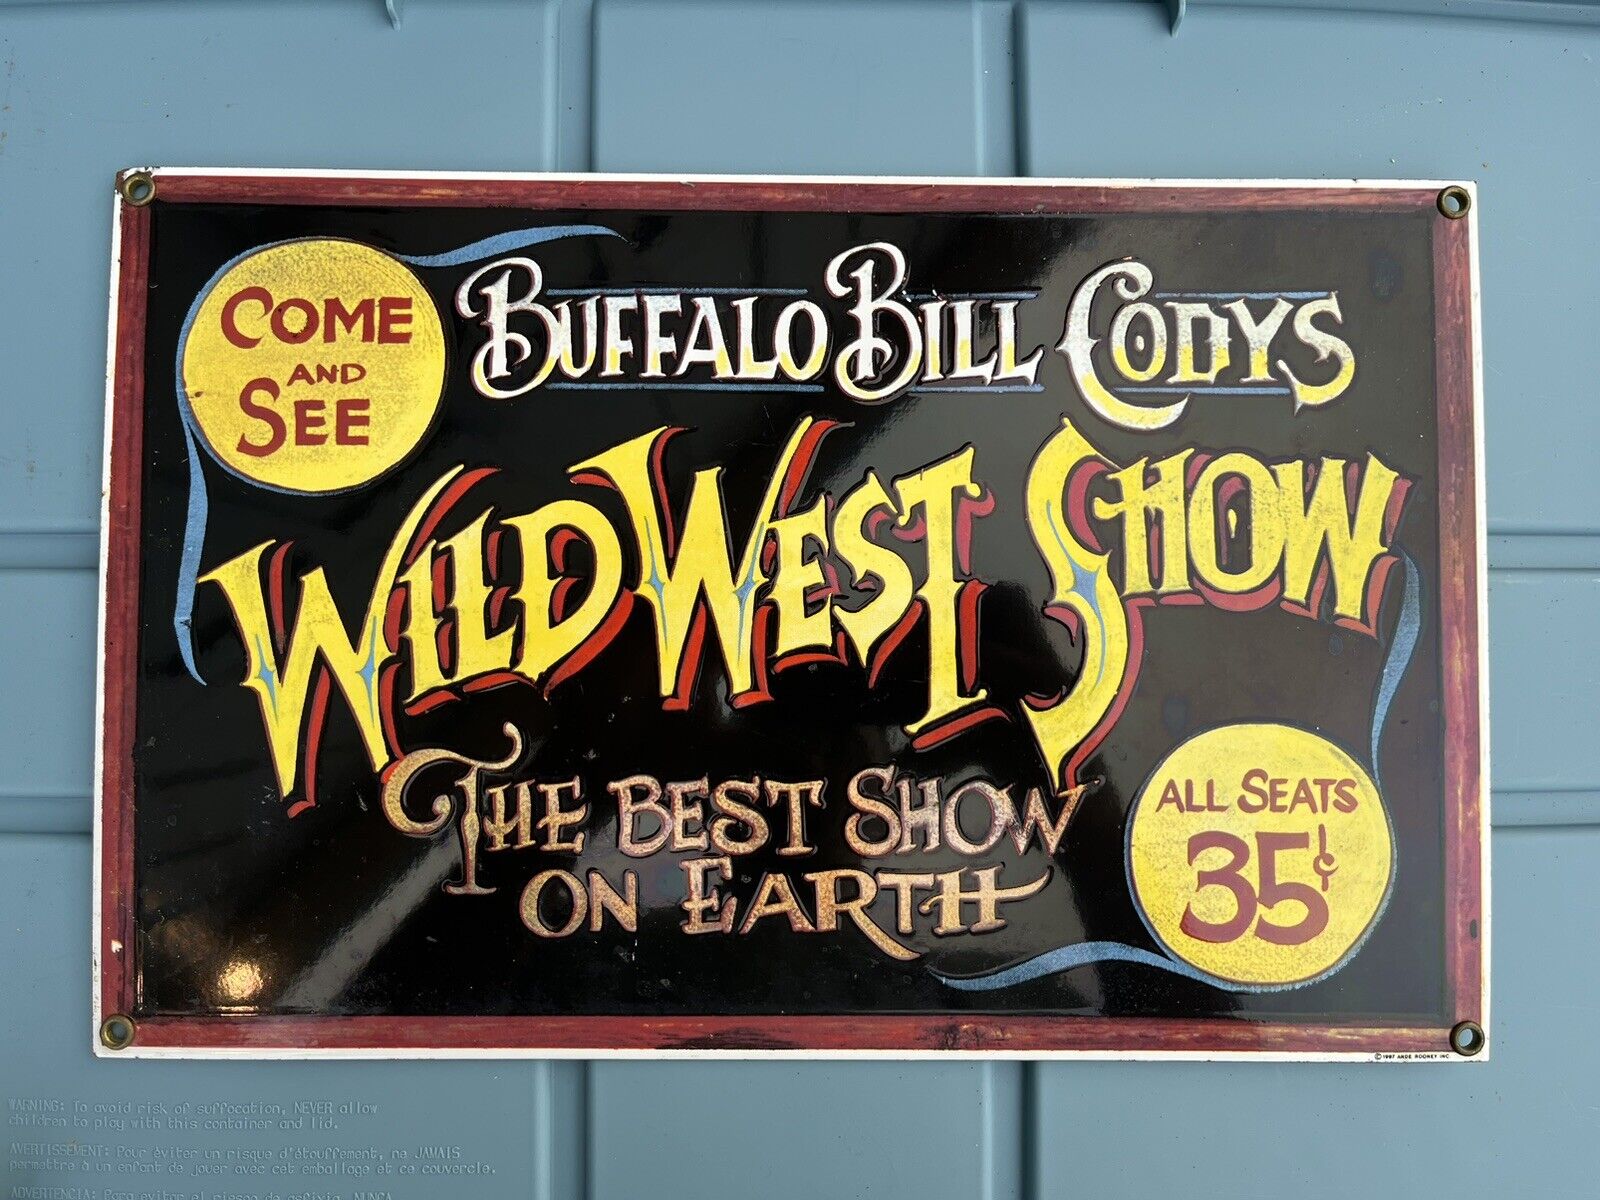 Ande Rooney Porcelain Sign “Buffalo Bill Codys” Wild West Show 1987 13.5x11.5”